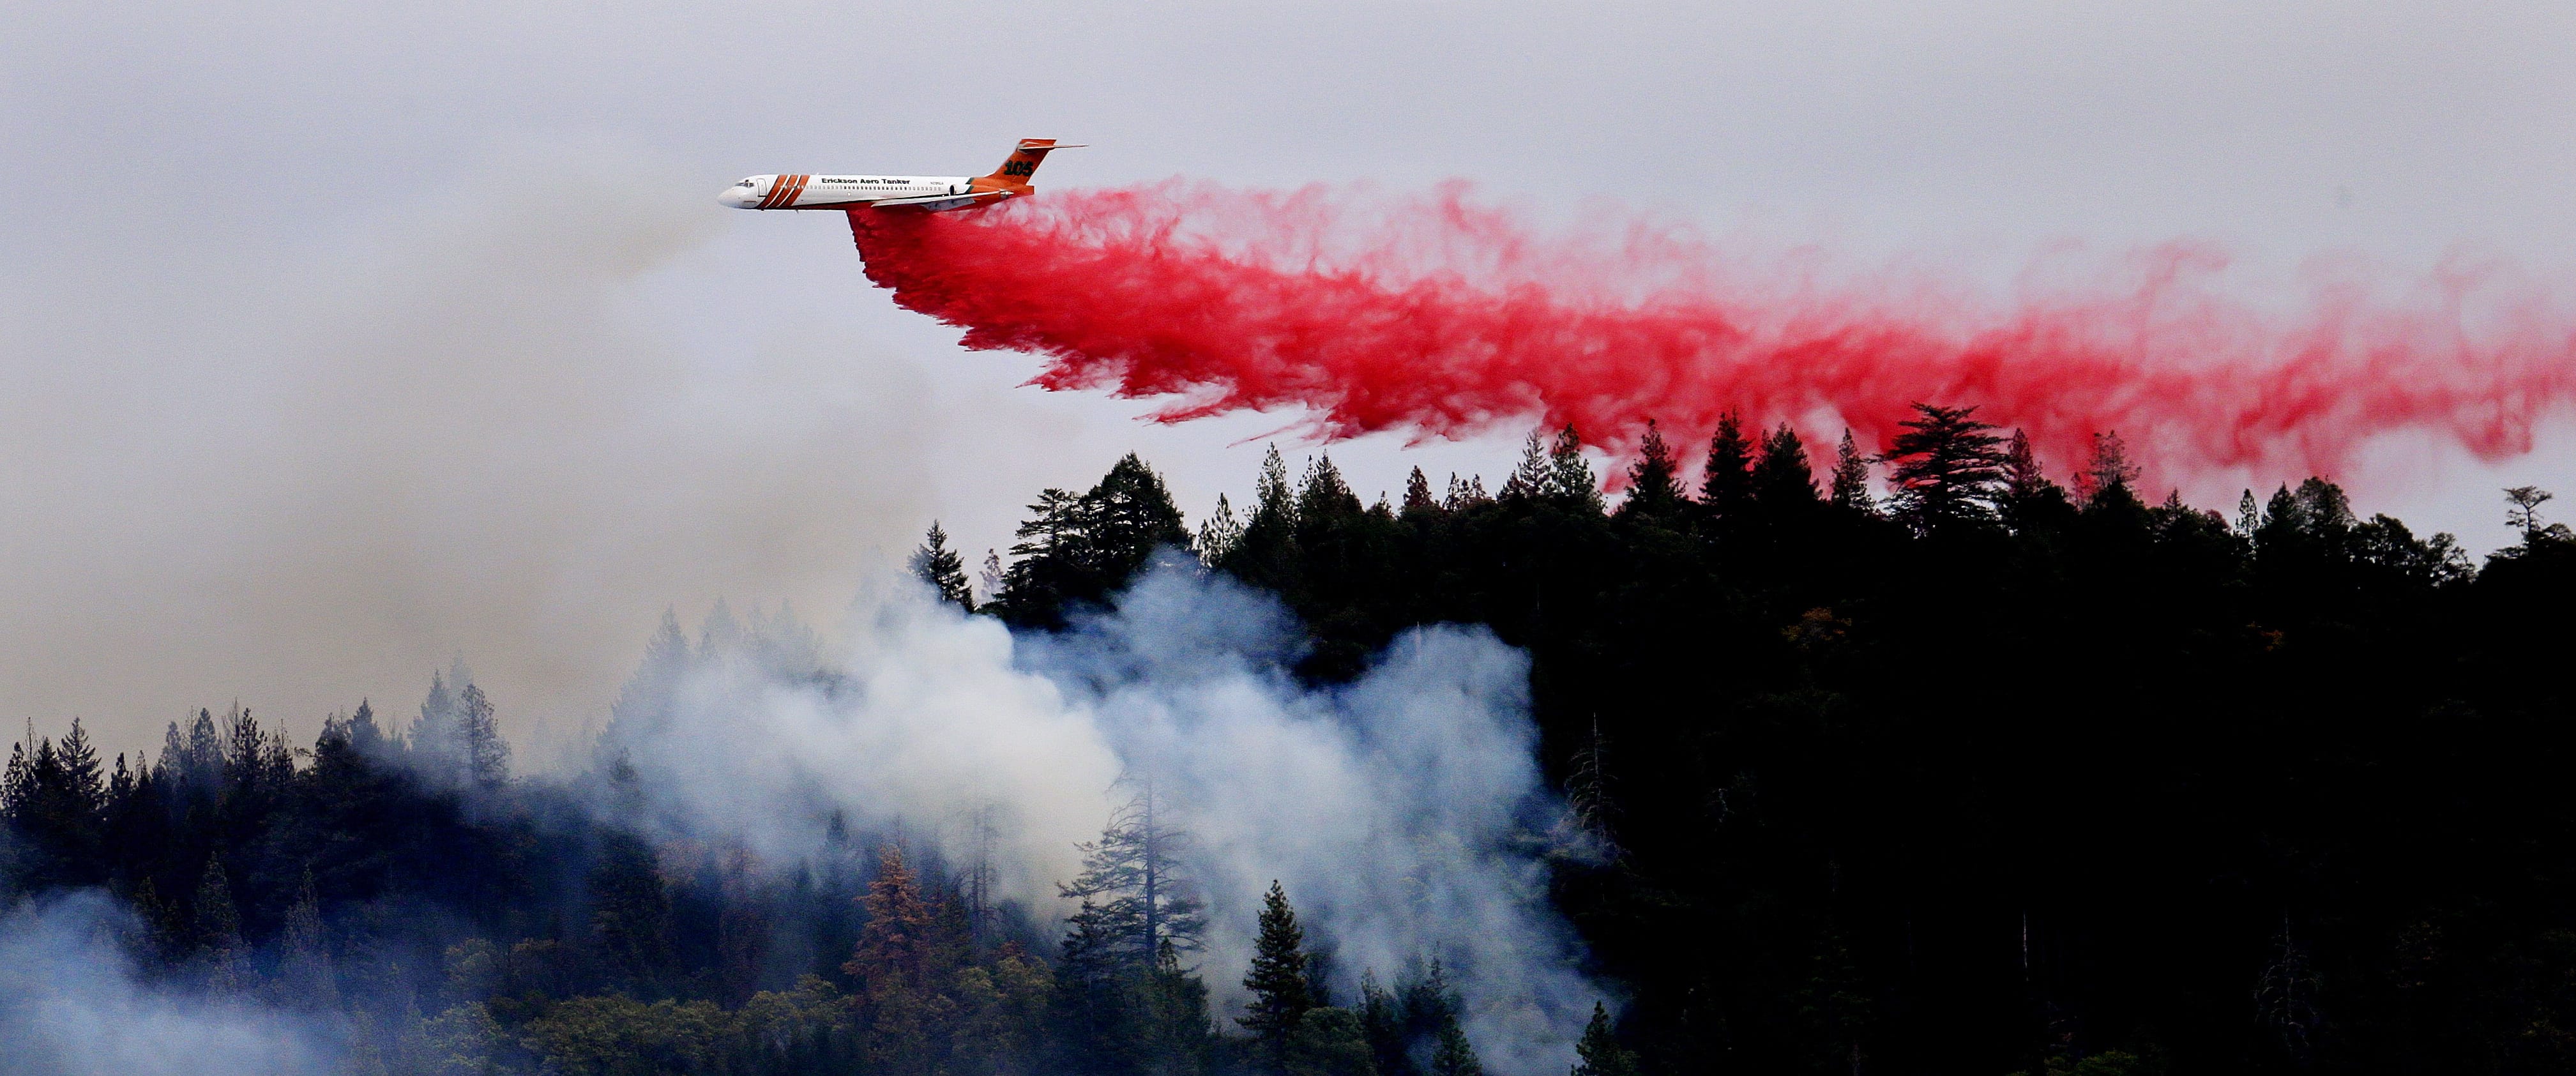 A firefighting plane drops a load of fire retardant over a smoldering hillside Tuesday in Middletown, Calif. The fire that sped through Middletown and other parts of rural Lake County, less than 100 miles north of San Francisco, has continued to burn since Saturday despite a massive firefighting effort.